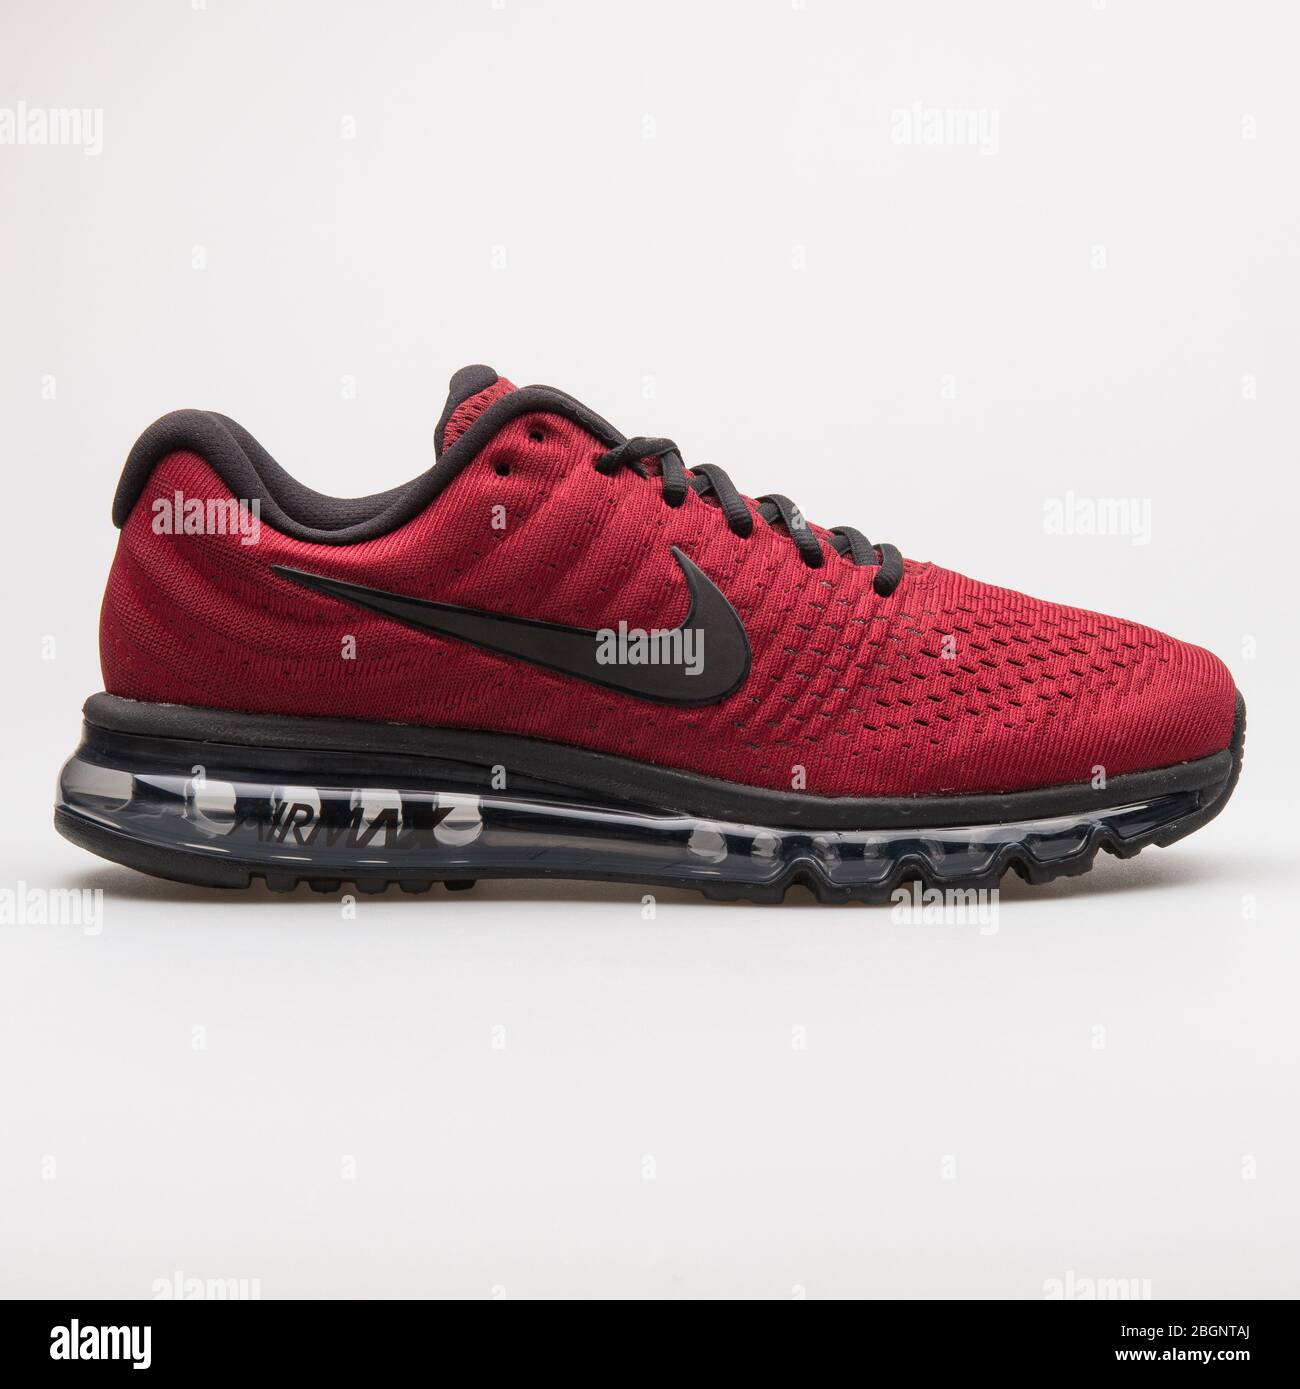 VIENNA, AUSTRIA AUGUST 24, 2017: Nike Air Max 2017 team red sneaker on white background Stock Photo - Alamy